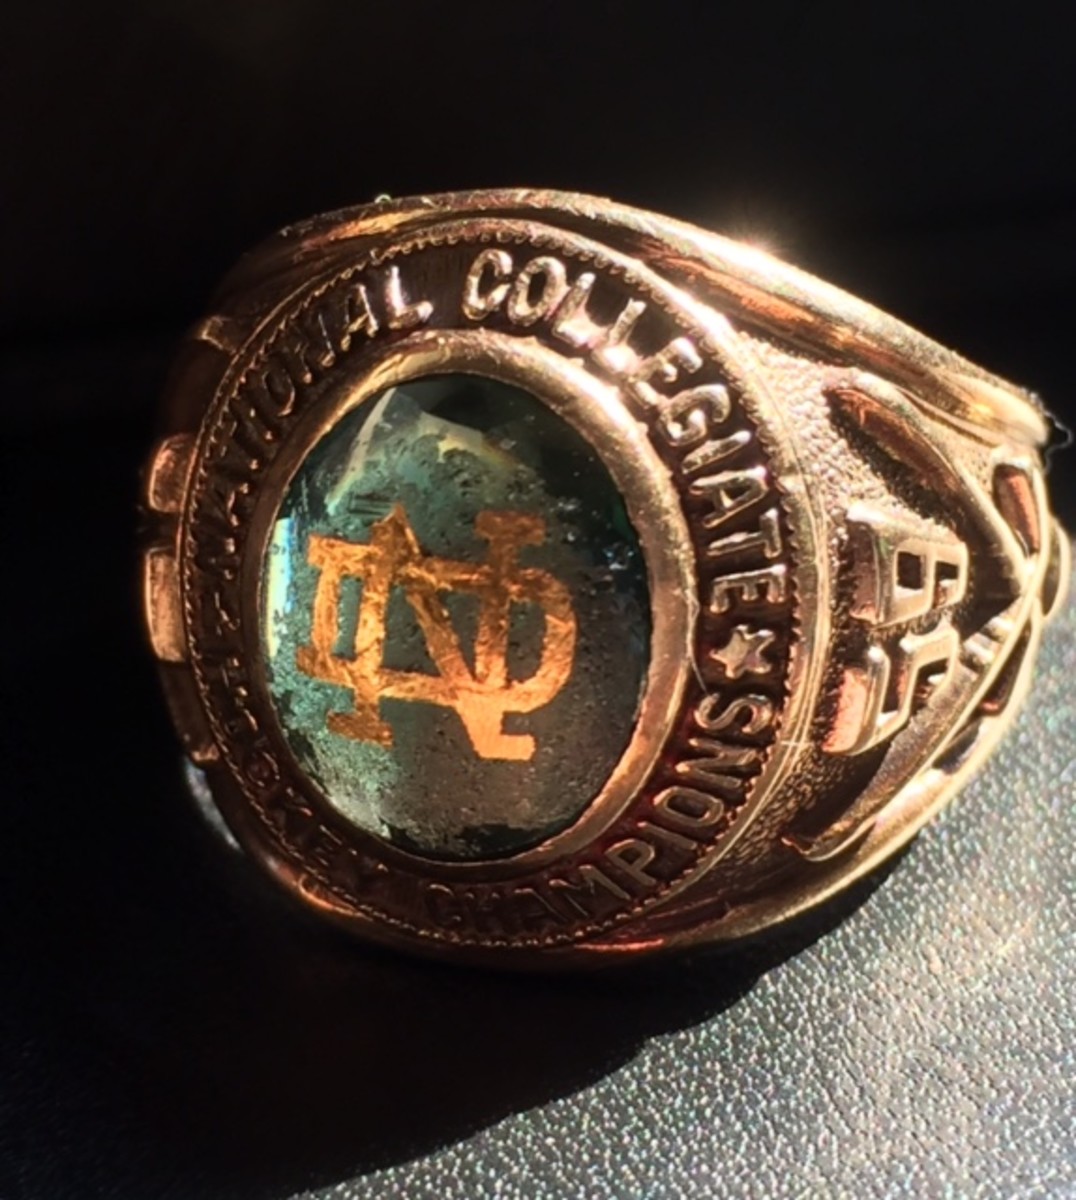 Former University of North Dakota hockey player Guy E. LaFrance still had his championship ring from 1959. He scored the overtime, game-winning goal against St. Lawrence in the semifinals in Troy, N.Y. 